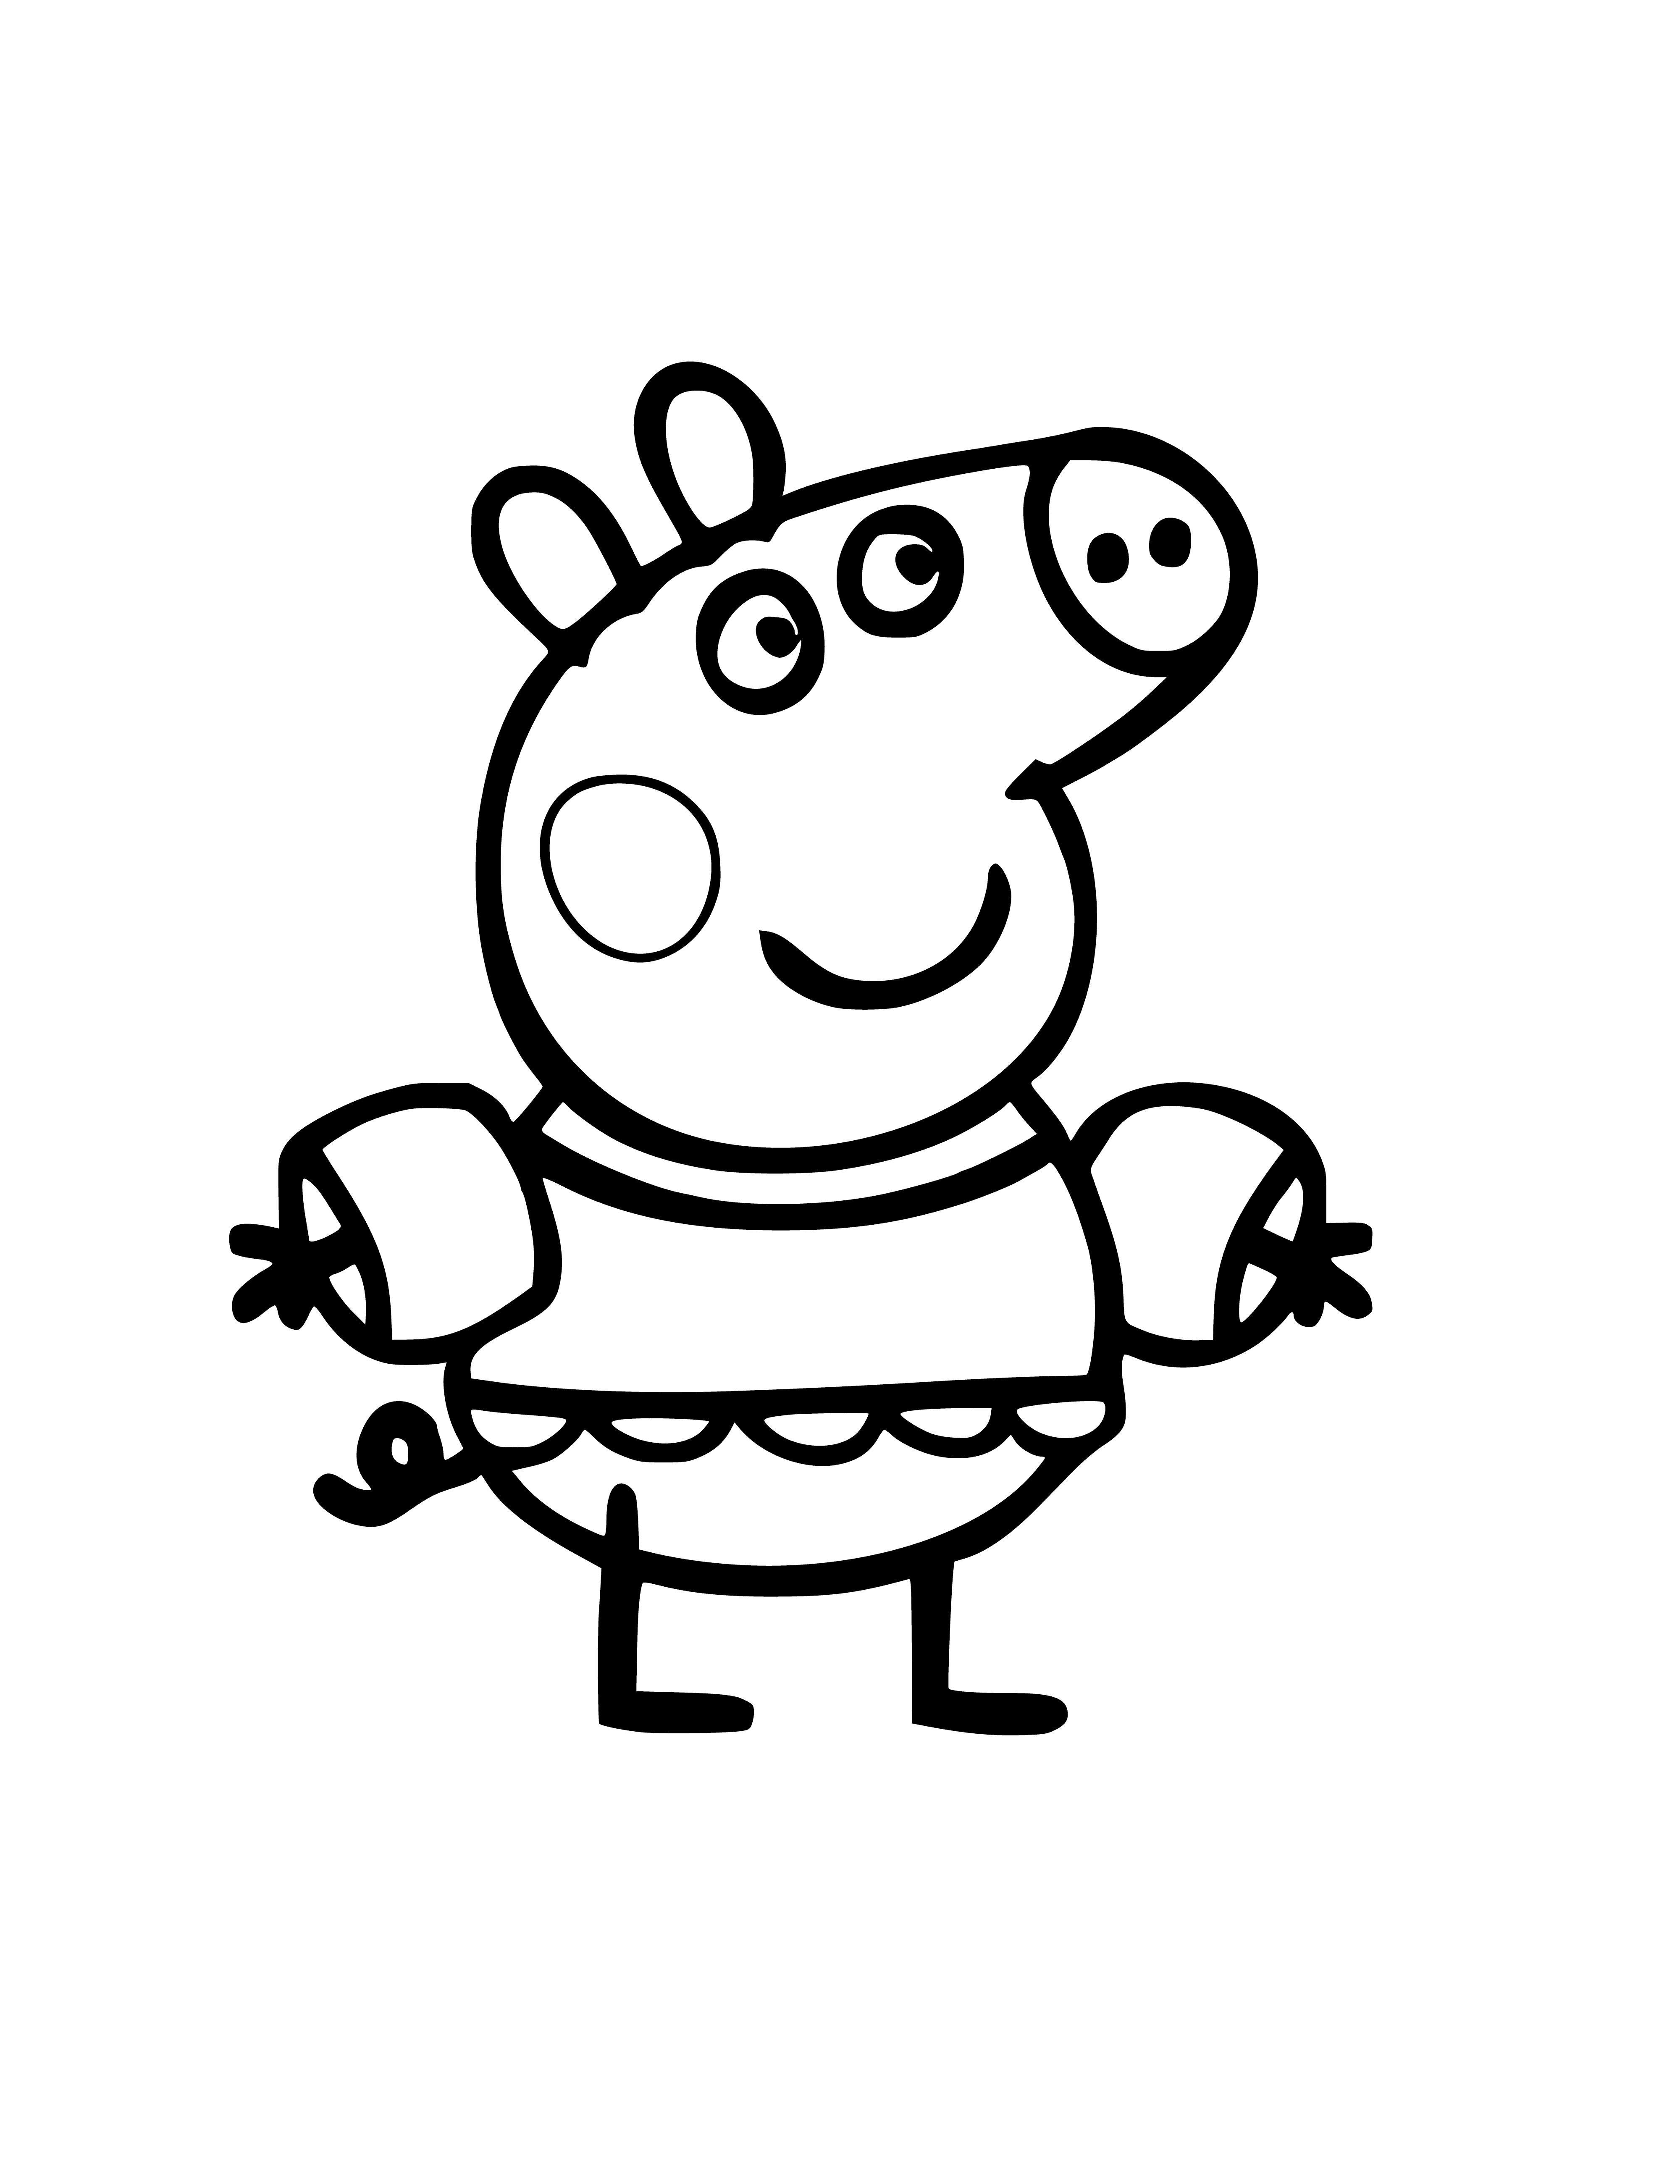 Peppa in armbands coloring page